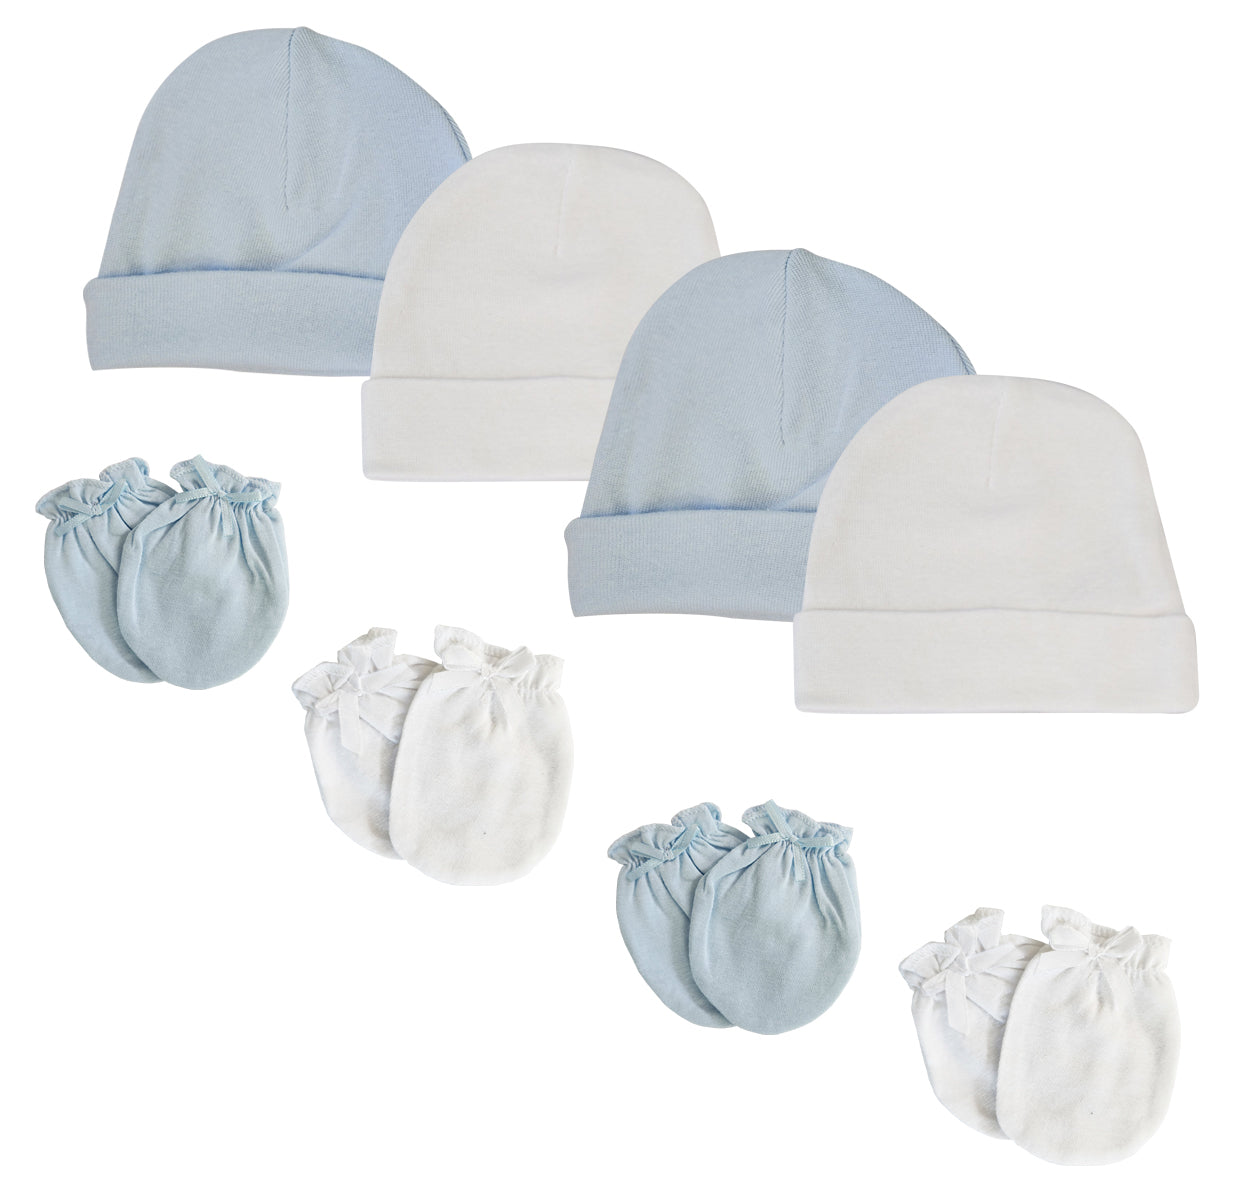 Baby Boys Caps and Infant MIttens - 8 pc Set NC_0256